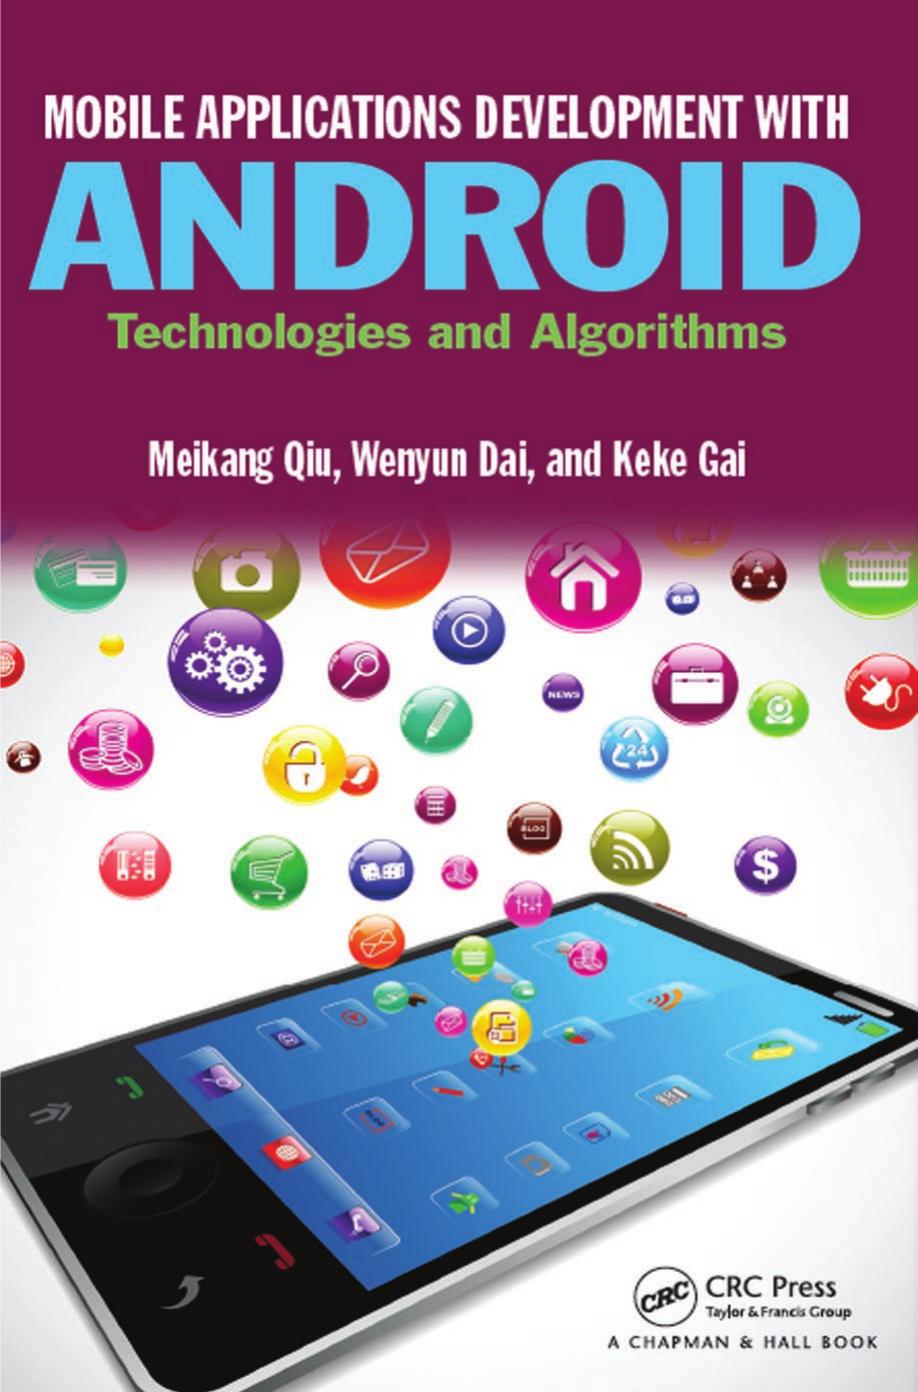 Mobile applications development with Android  technologies andalgorithms ( PDFDrive )